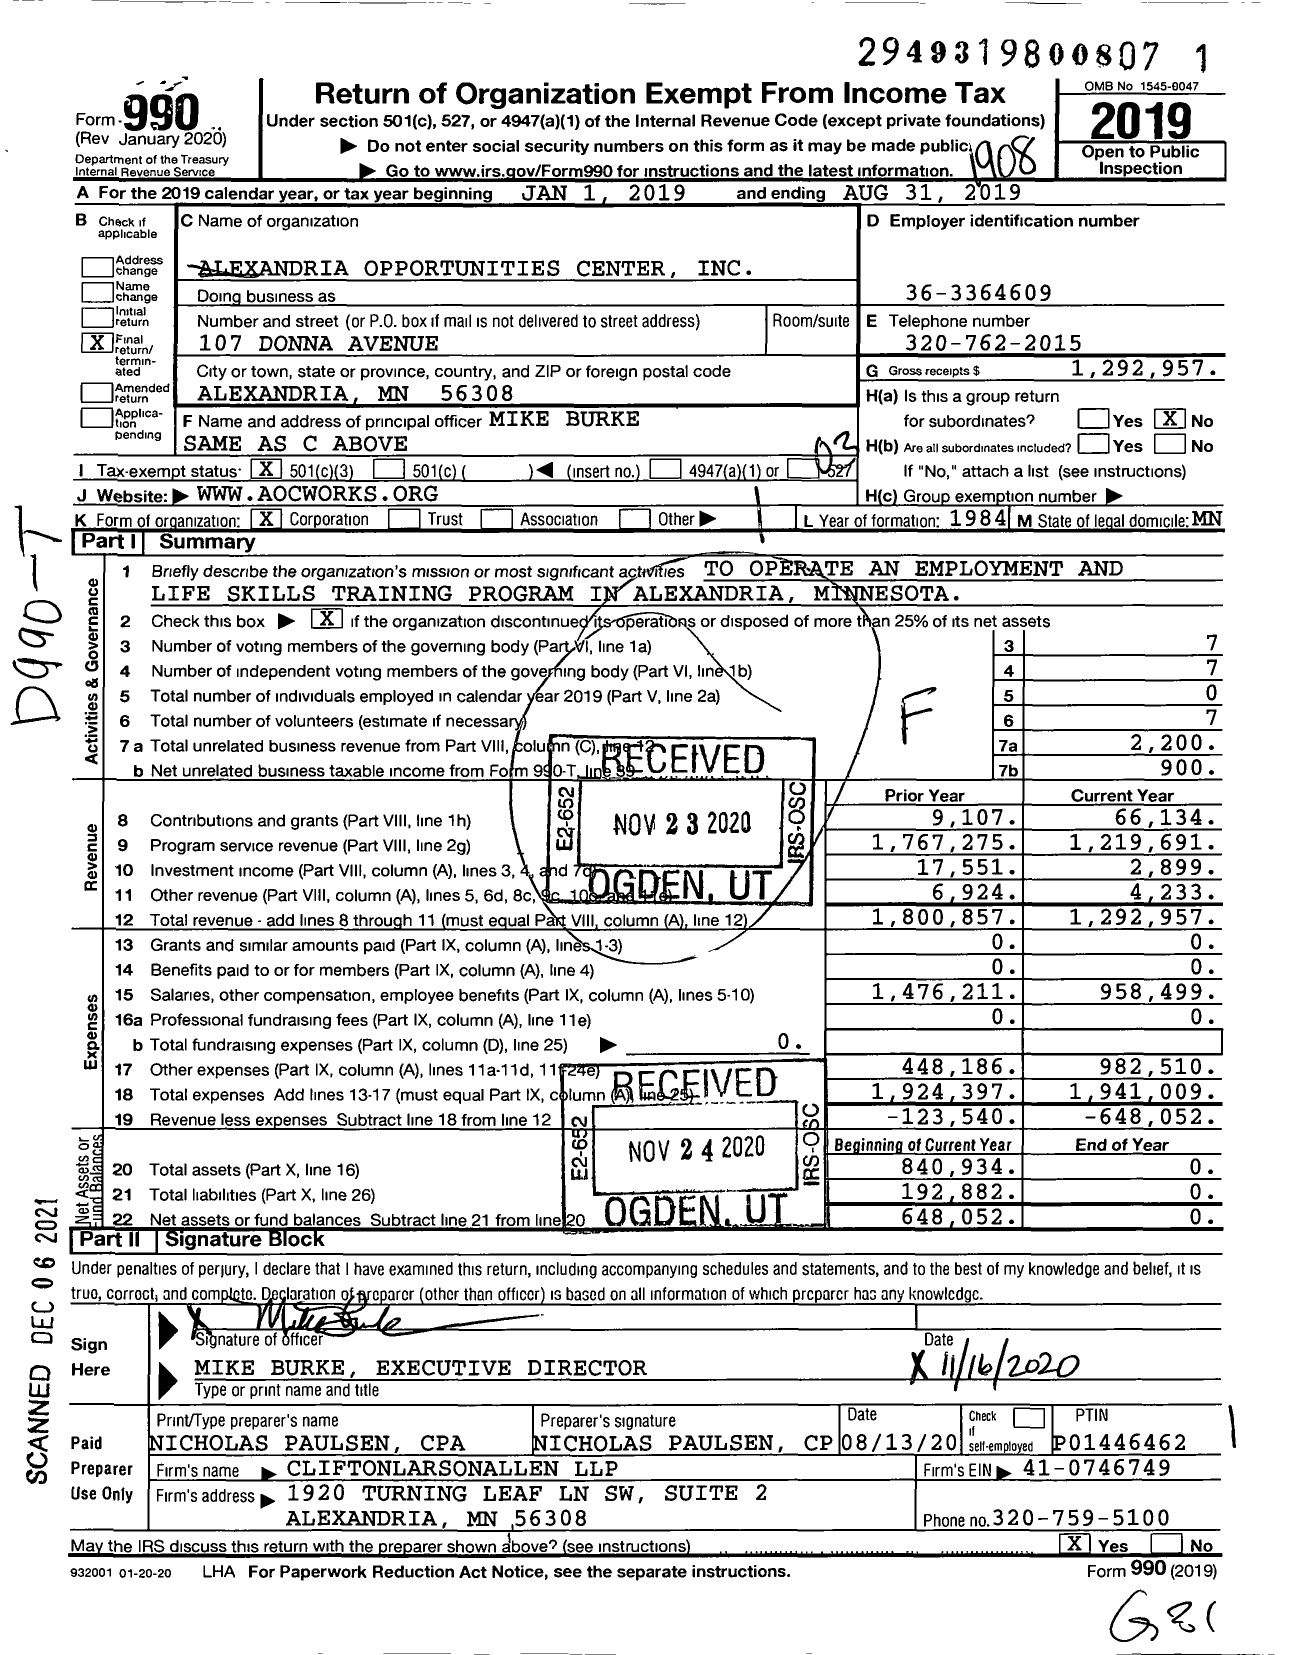 Image of first page of 2018 Form 990 for Alexandria Opportunities Center